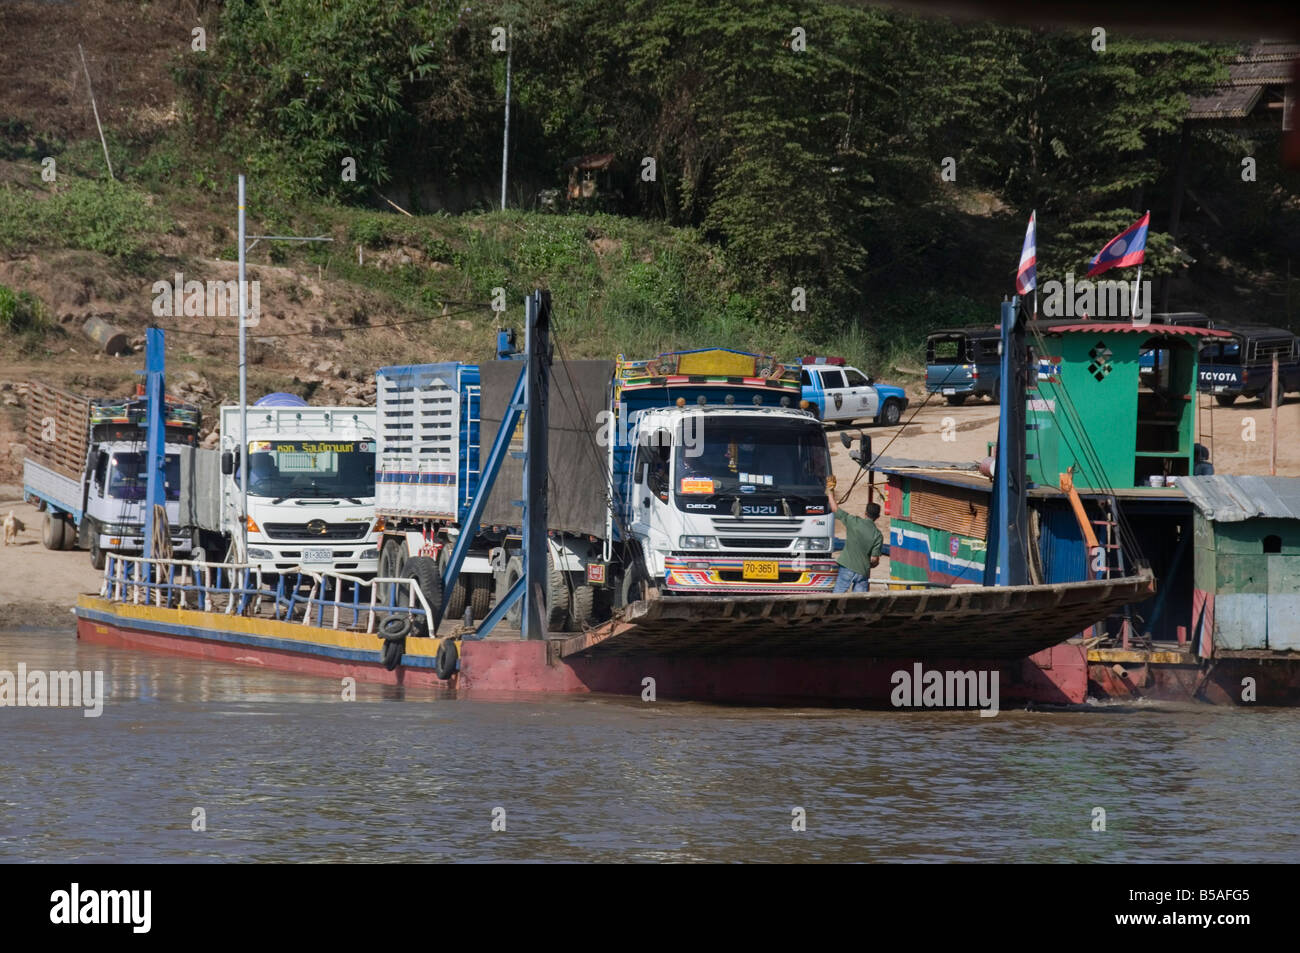 Ferry from Thailand crossing the Mekong River towards Laos, Southeast Asia Stock Photo